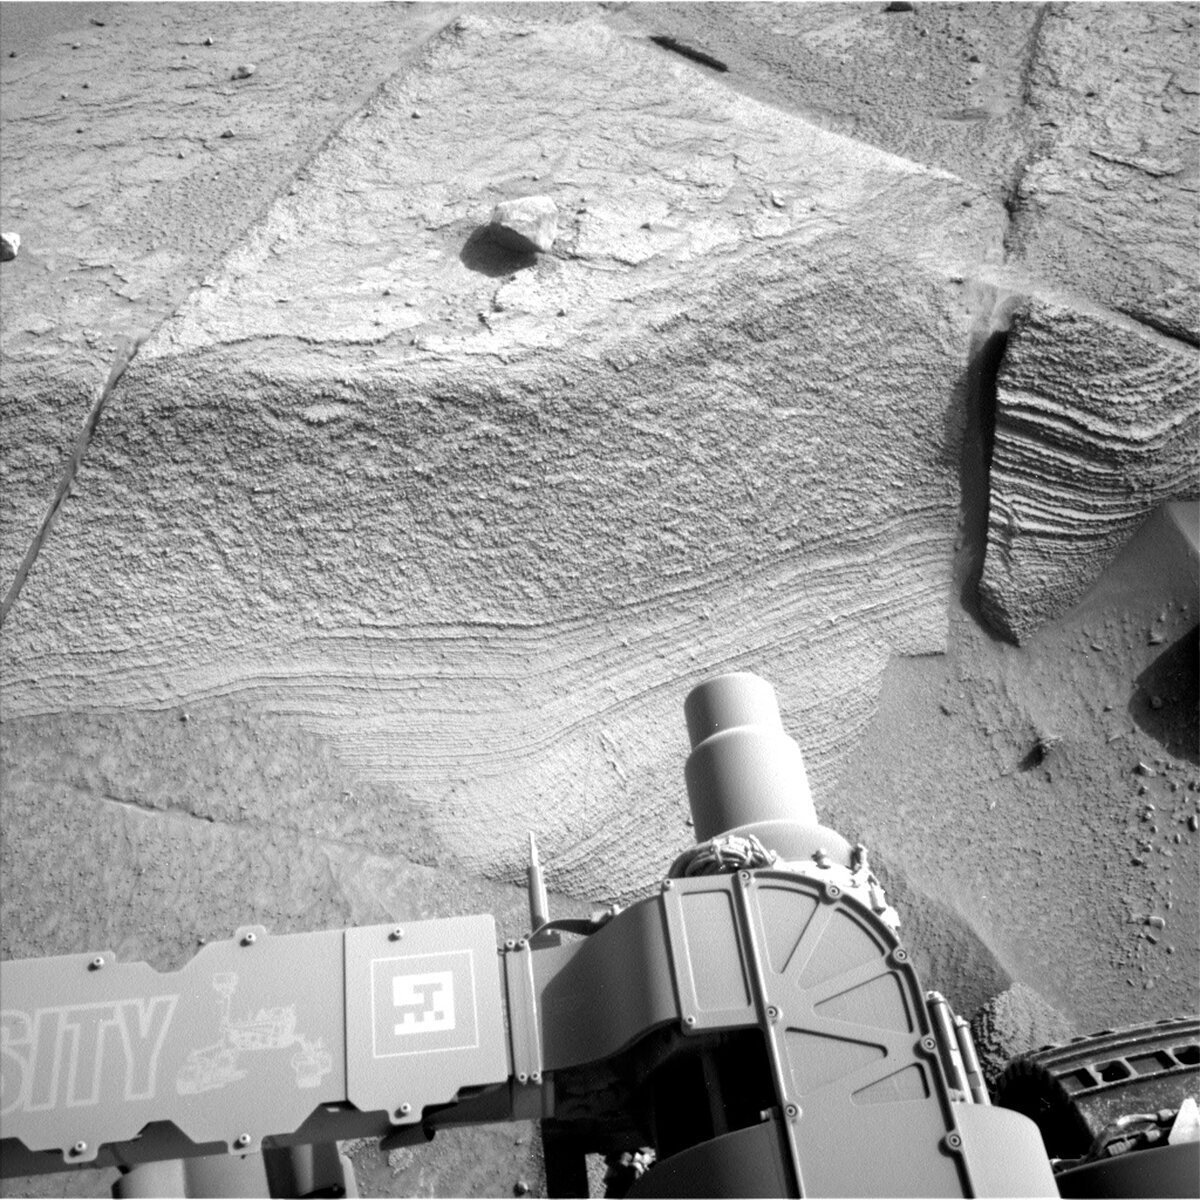 This image shows part of the Curiosity rover standing before rock on the Martian surface on sol 3771.